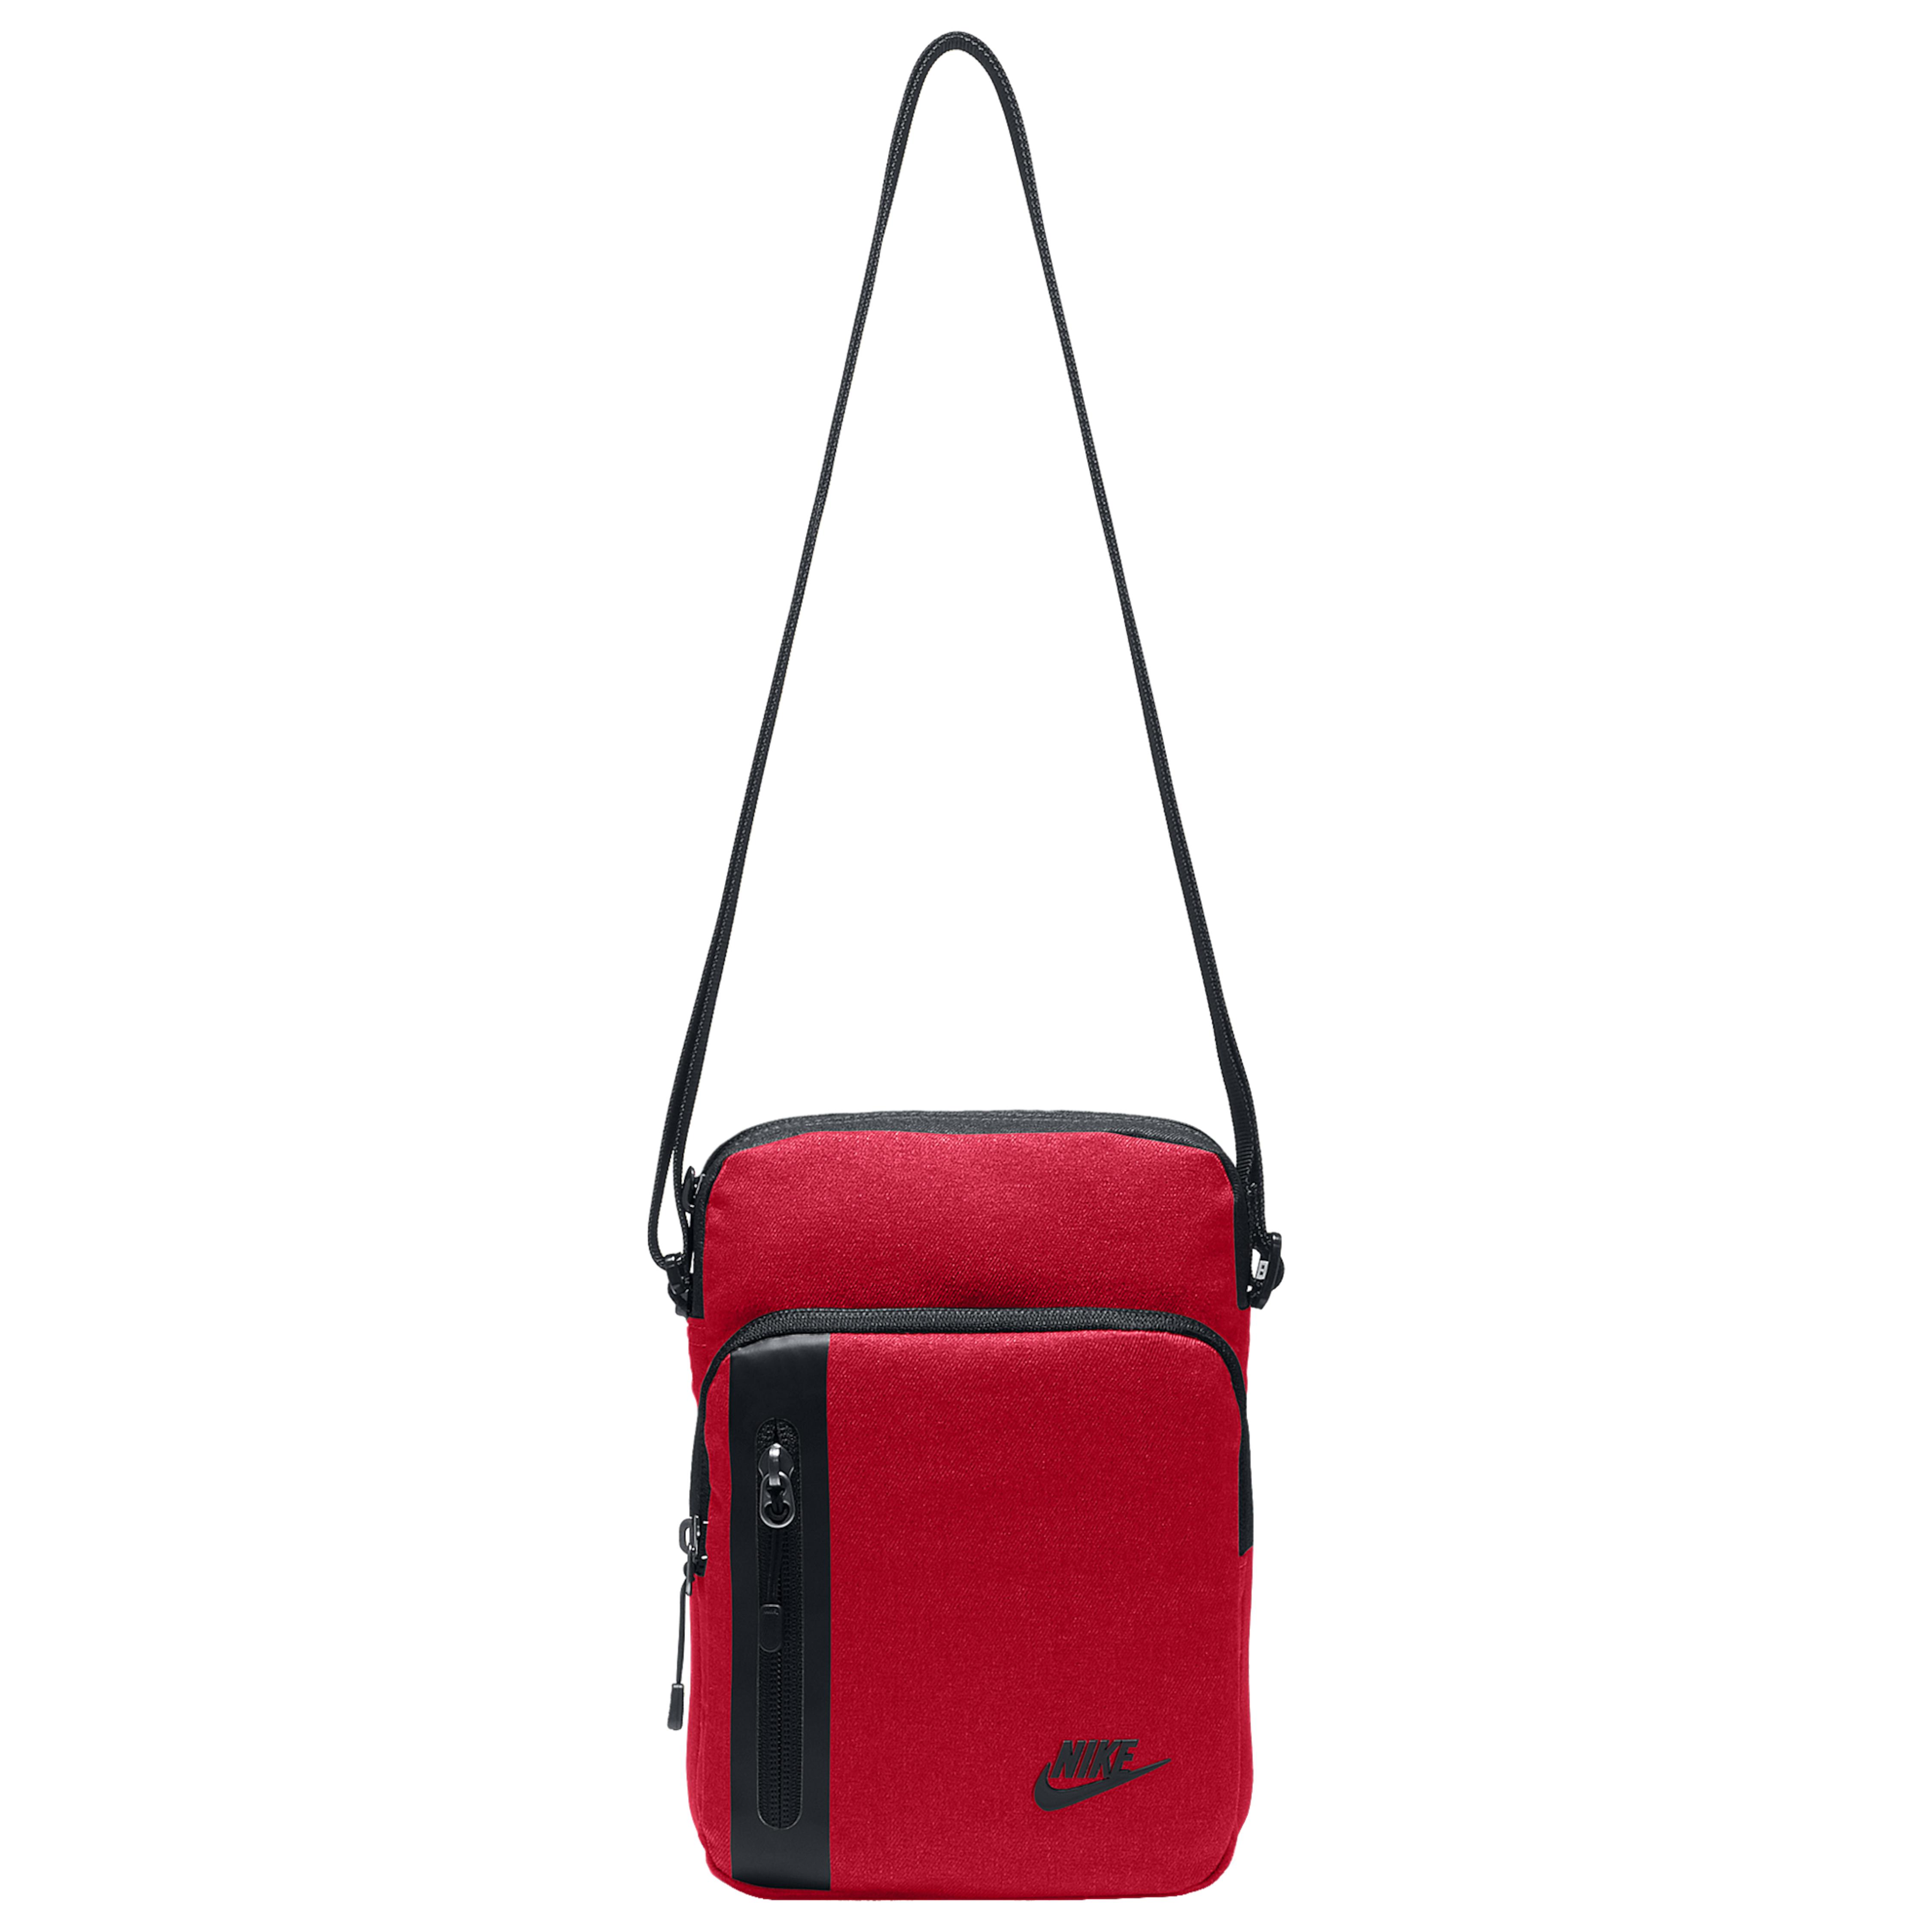 Nike Synthetic Tech Small Item Bag in Red / Black (Red) for Men - Lyst